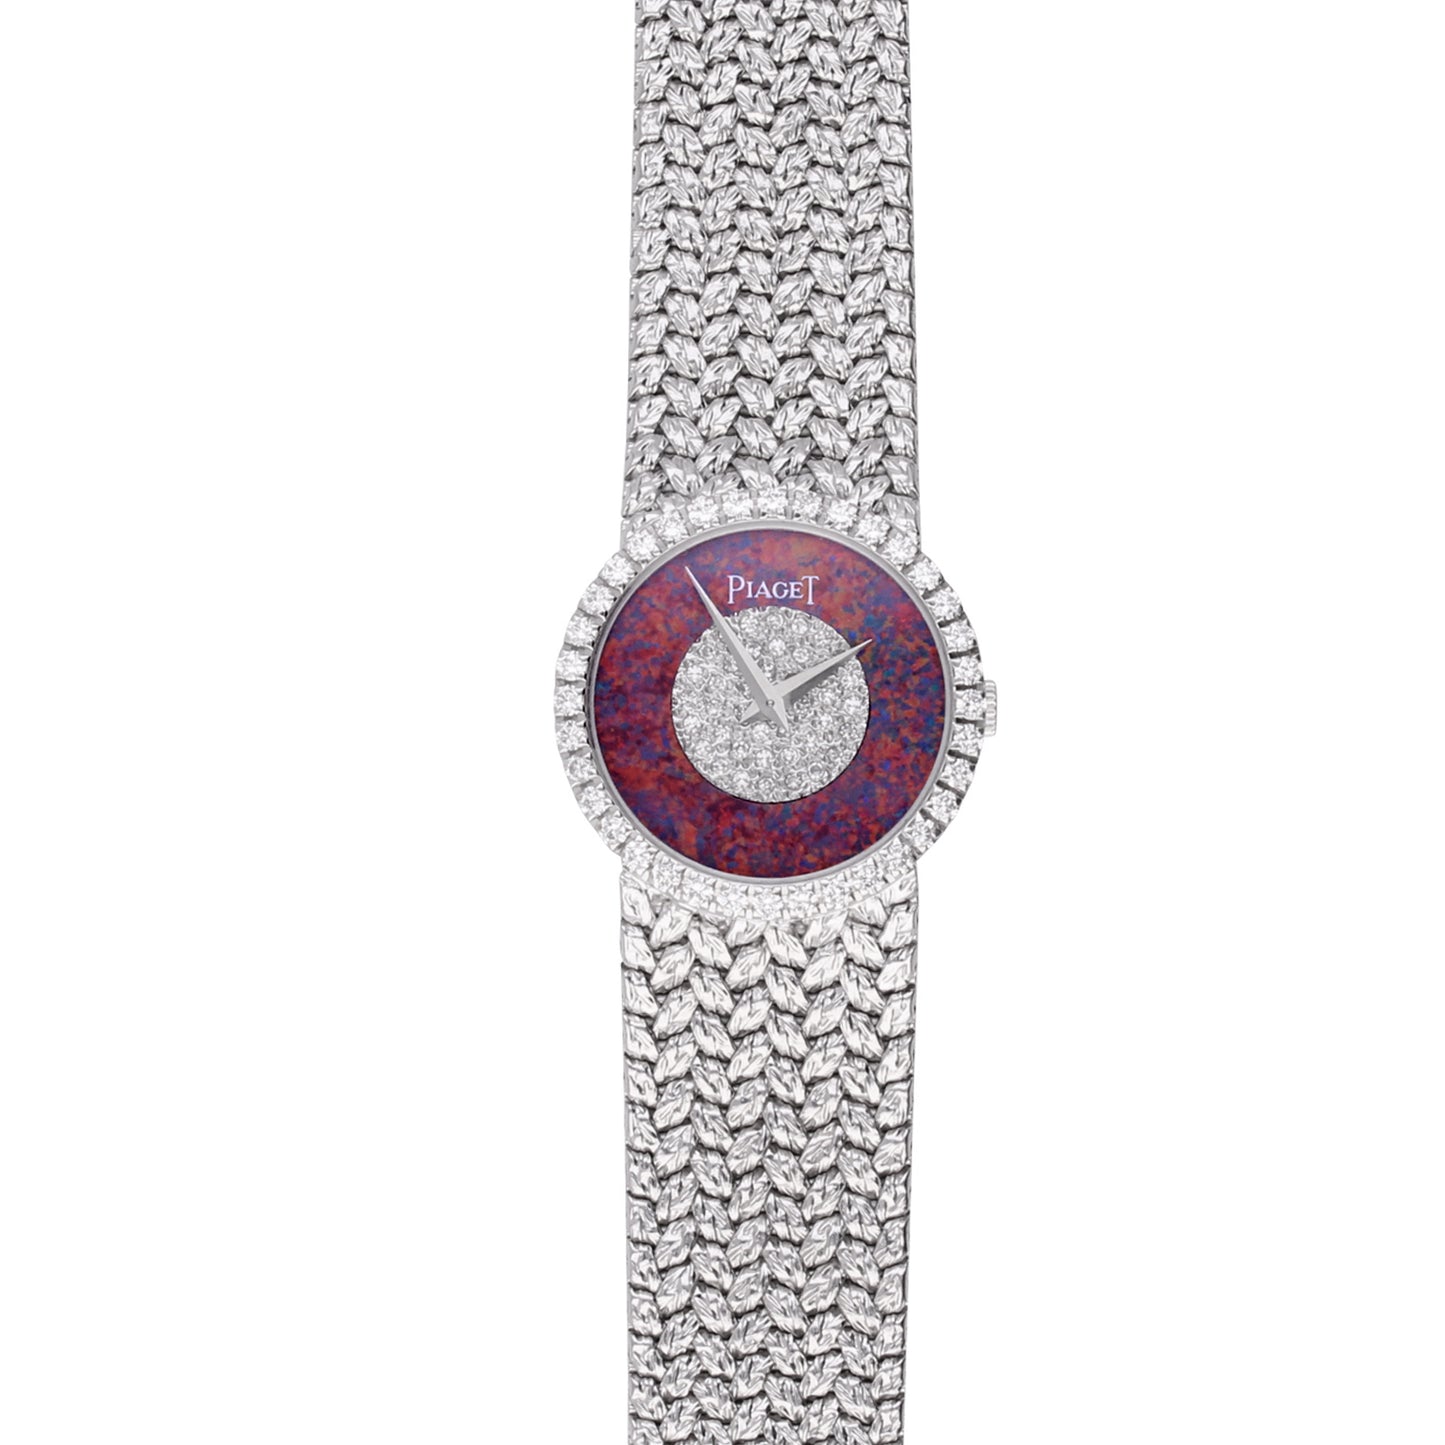 18ct white gold Piaget opal and pave diamond dial bracelet watch. Made 1970's